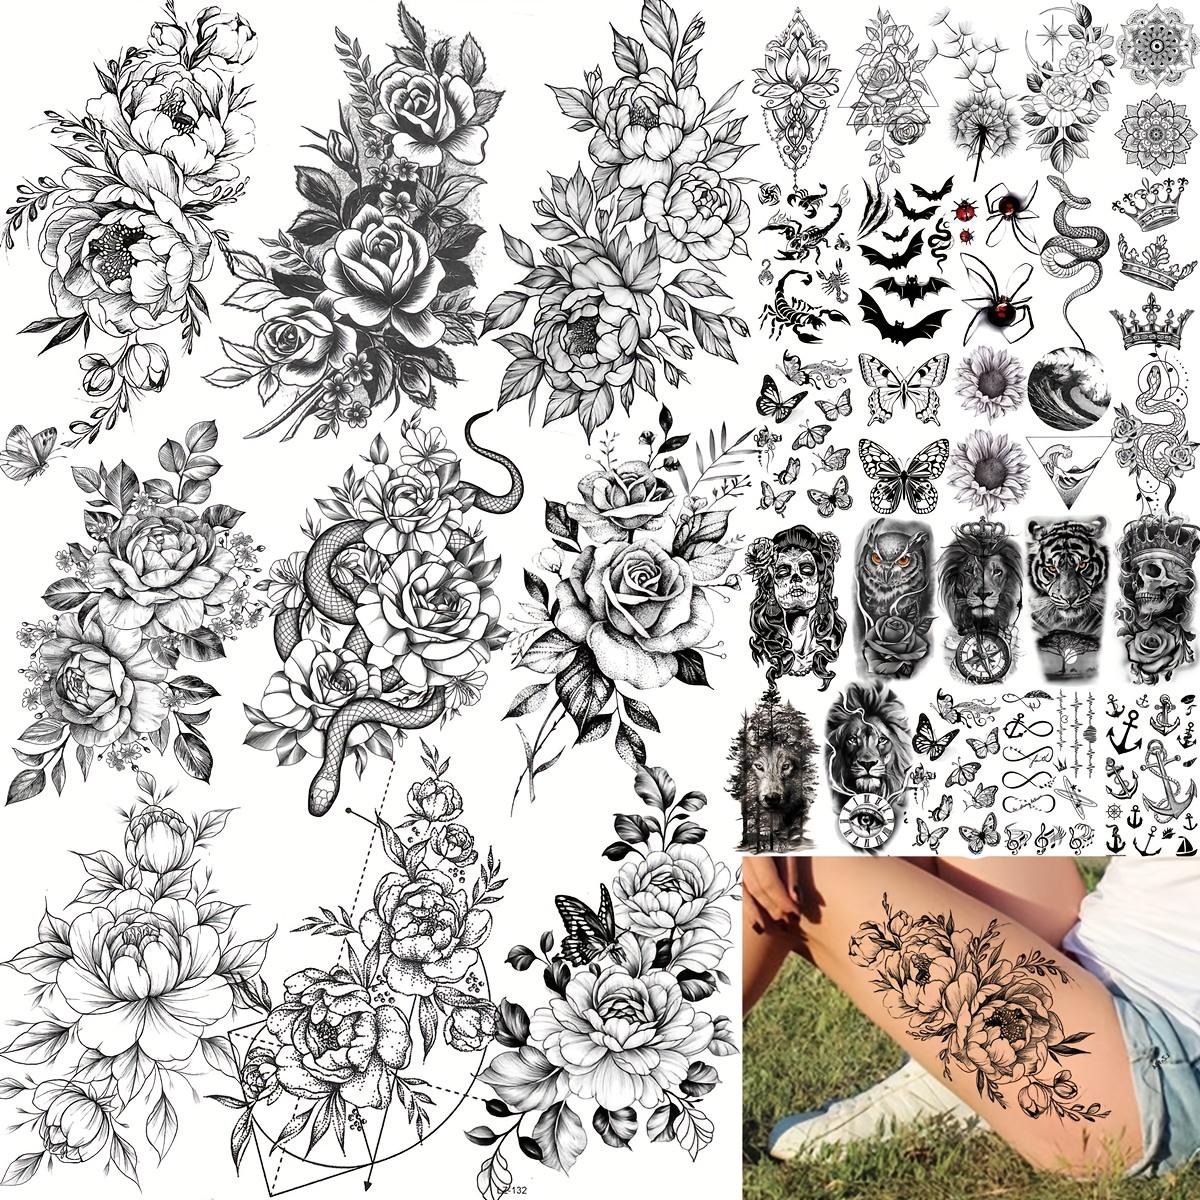 Large Realistic Flower Temporary Tattoos for Women Adults Girls Black Rose  Floral Tattoo Sexy Body Tattoo Stickers Realistic Waterproof Fake Tattoo  Arm Chest Leg Back Temp Tattoo Paper (8 Sheets)